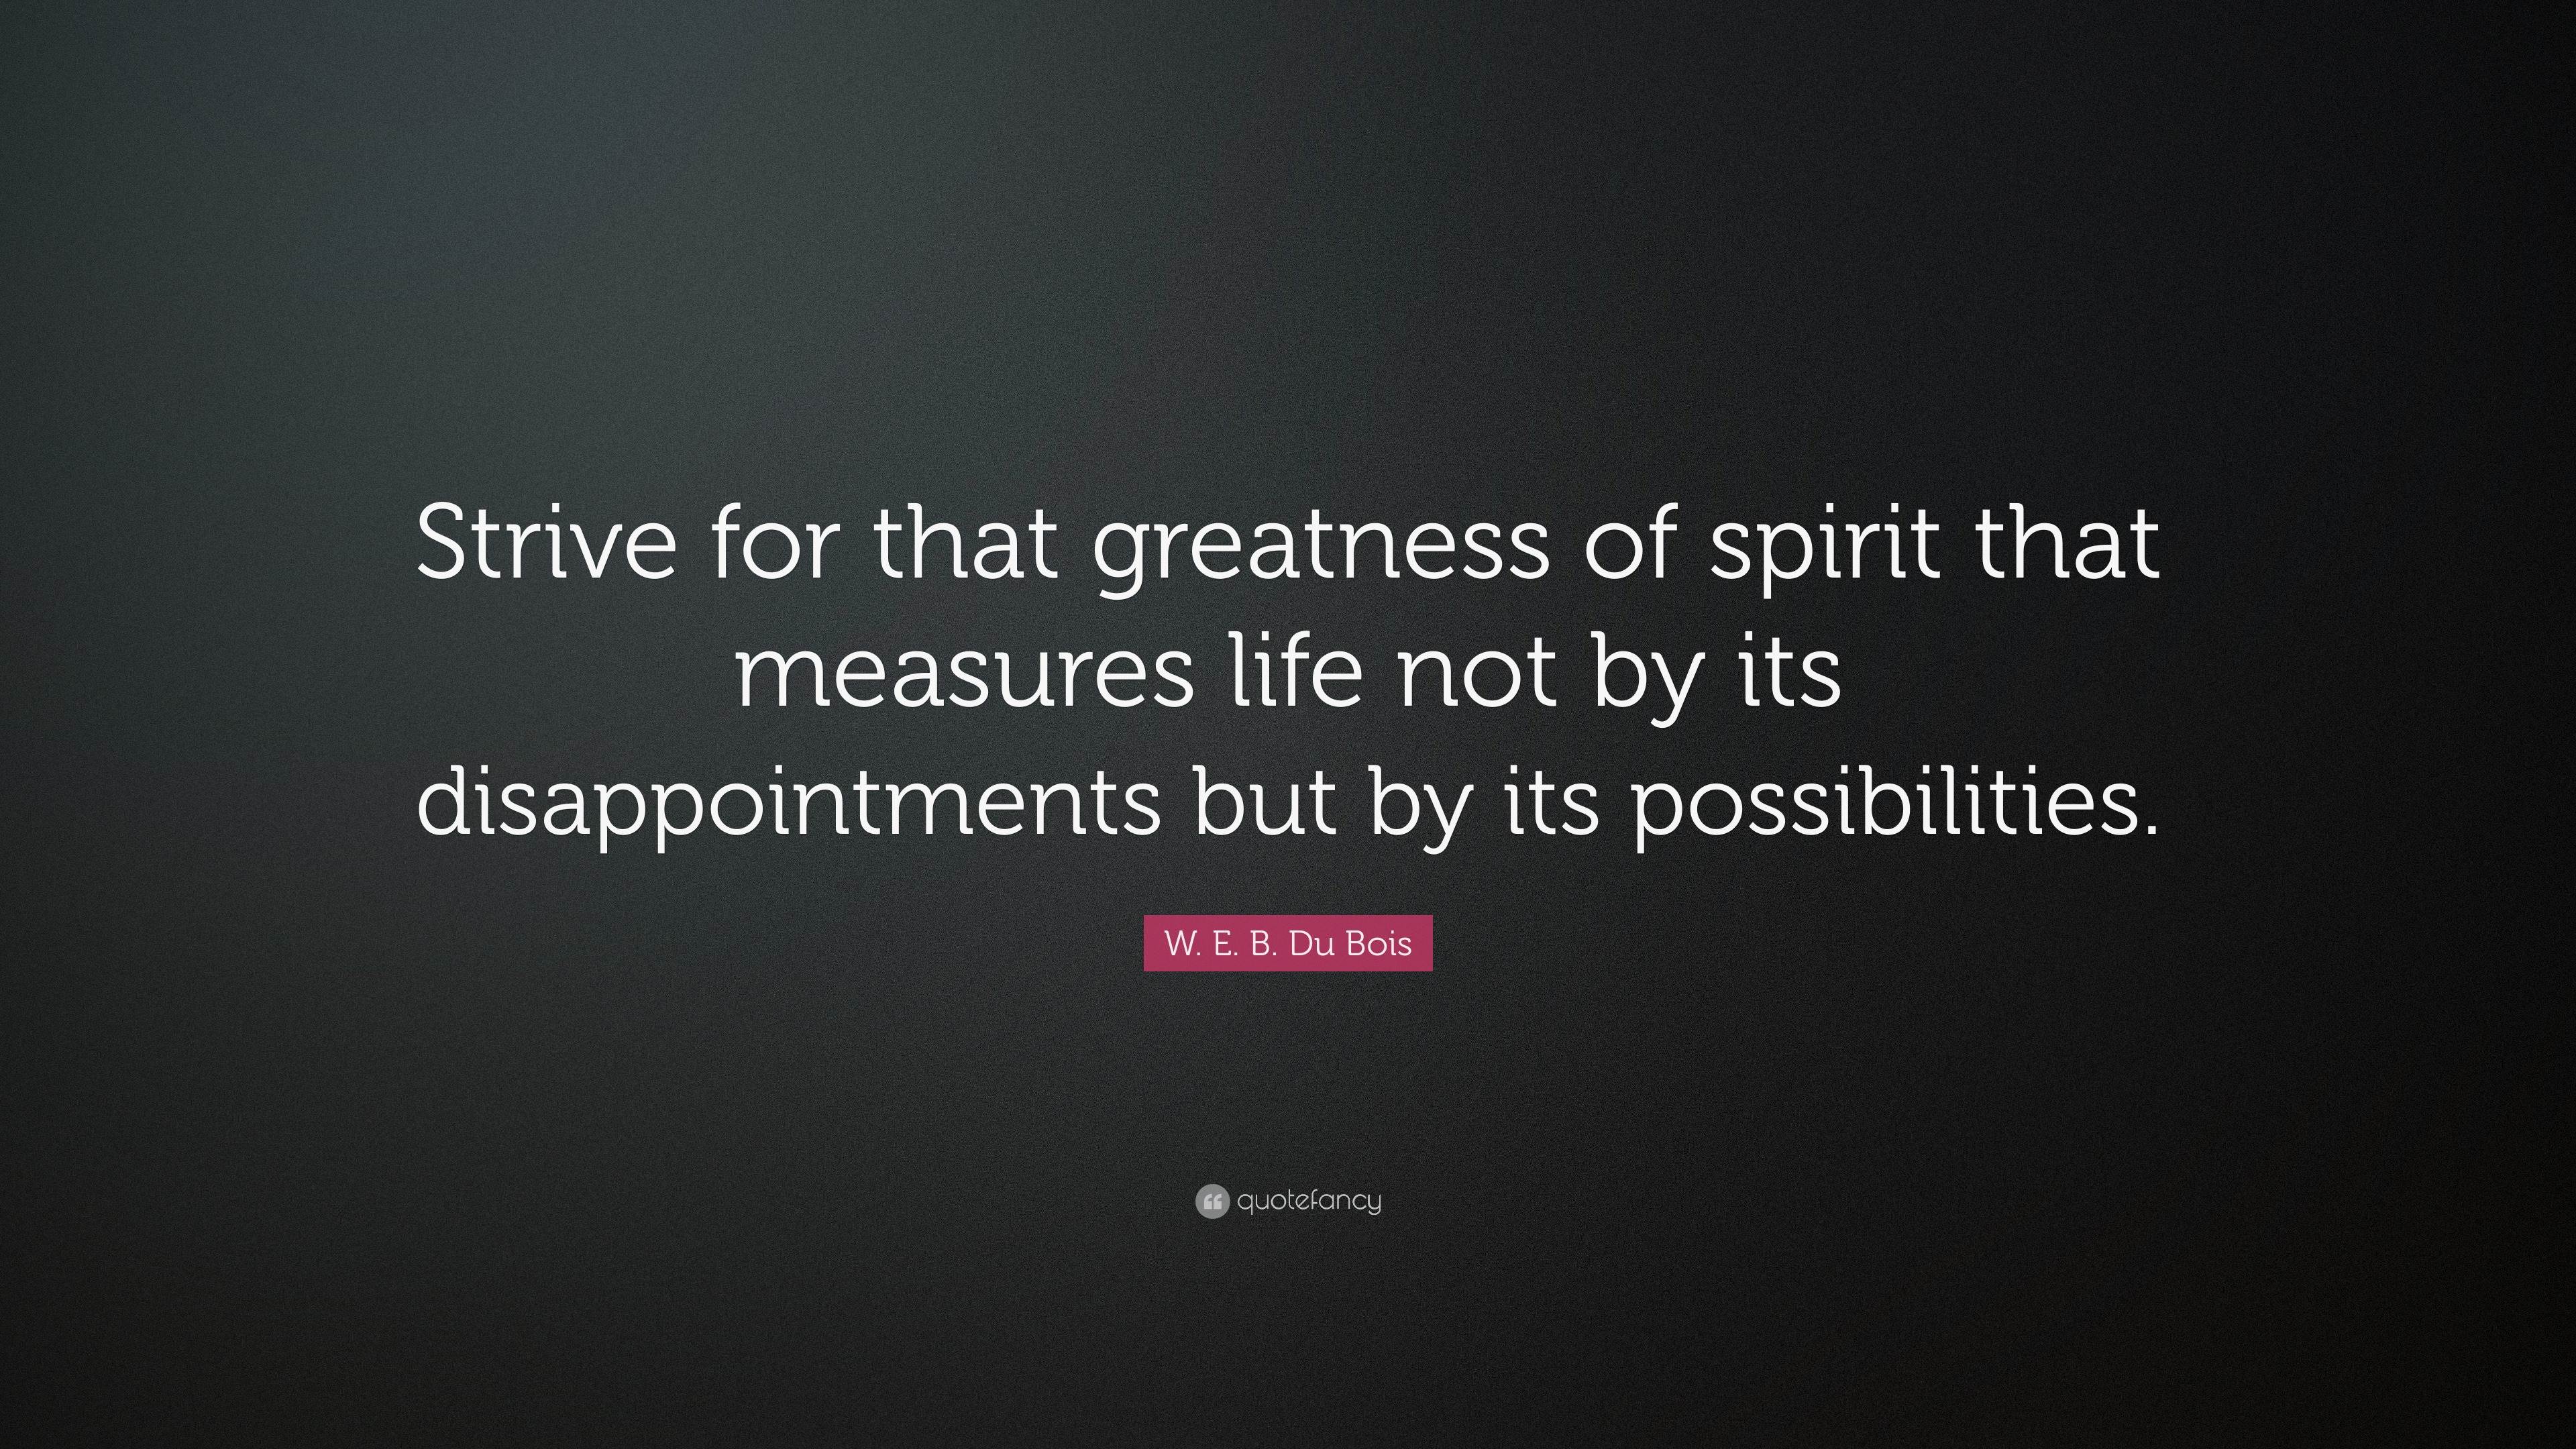 W. E. B. Du Bois Quote: “Strive for that greatness of spirit that measures  life not by its